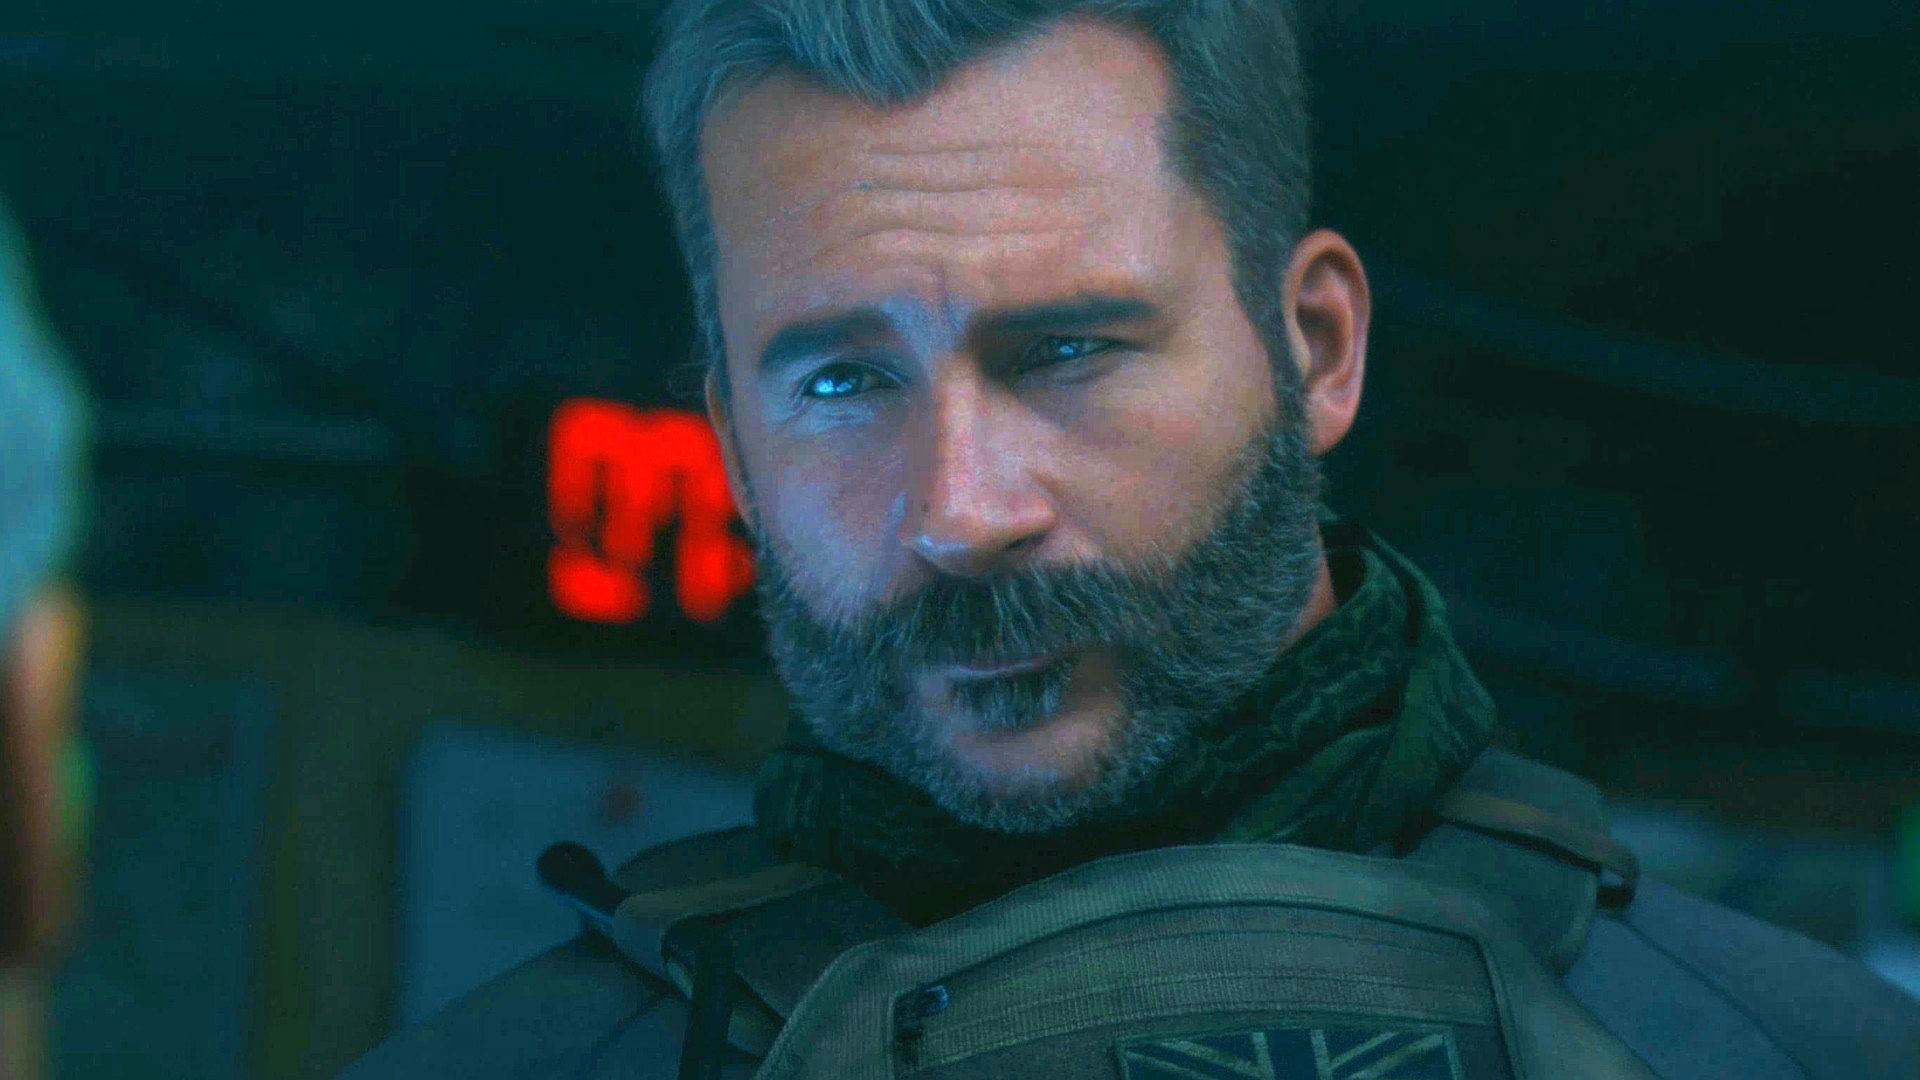 Sure looks like Captain Price is the Call of Duty: Modern Warfare